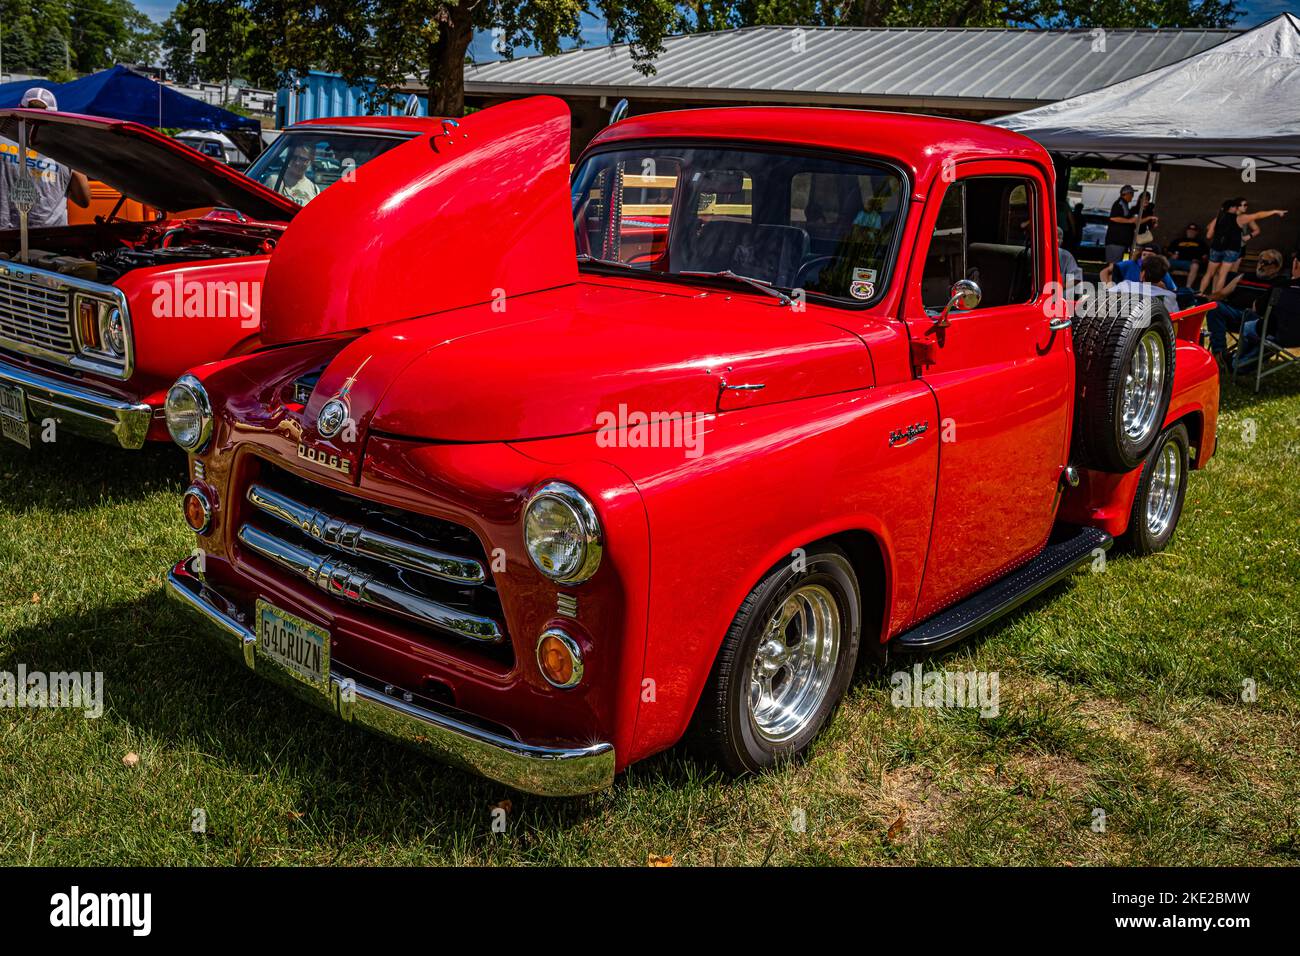 Des Moines, IA - July 02, 2022: High perspective front corner view of a 1954 Dodge C1 B6 Pickup Truck at a local car show. Stock Photo